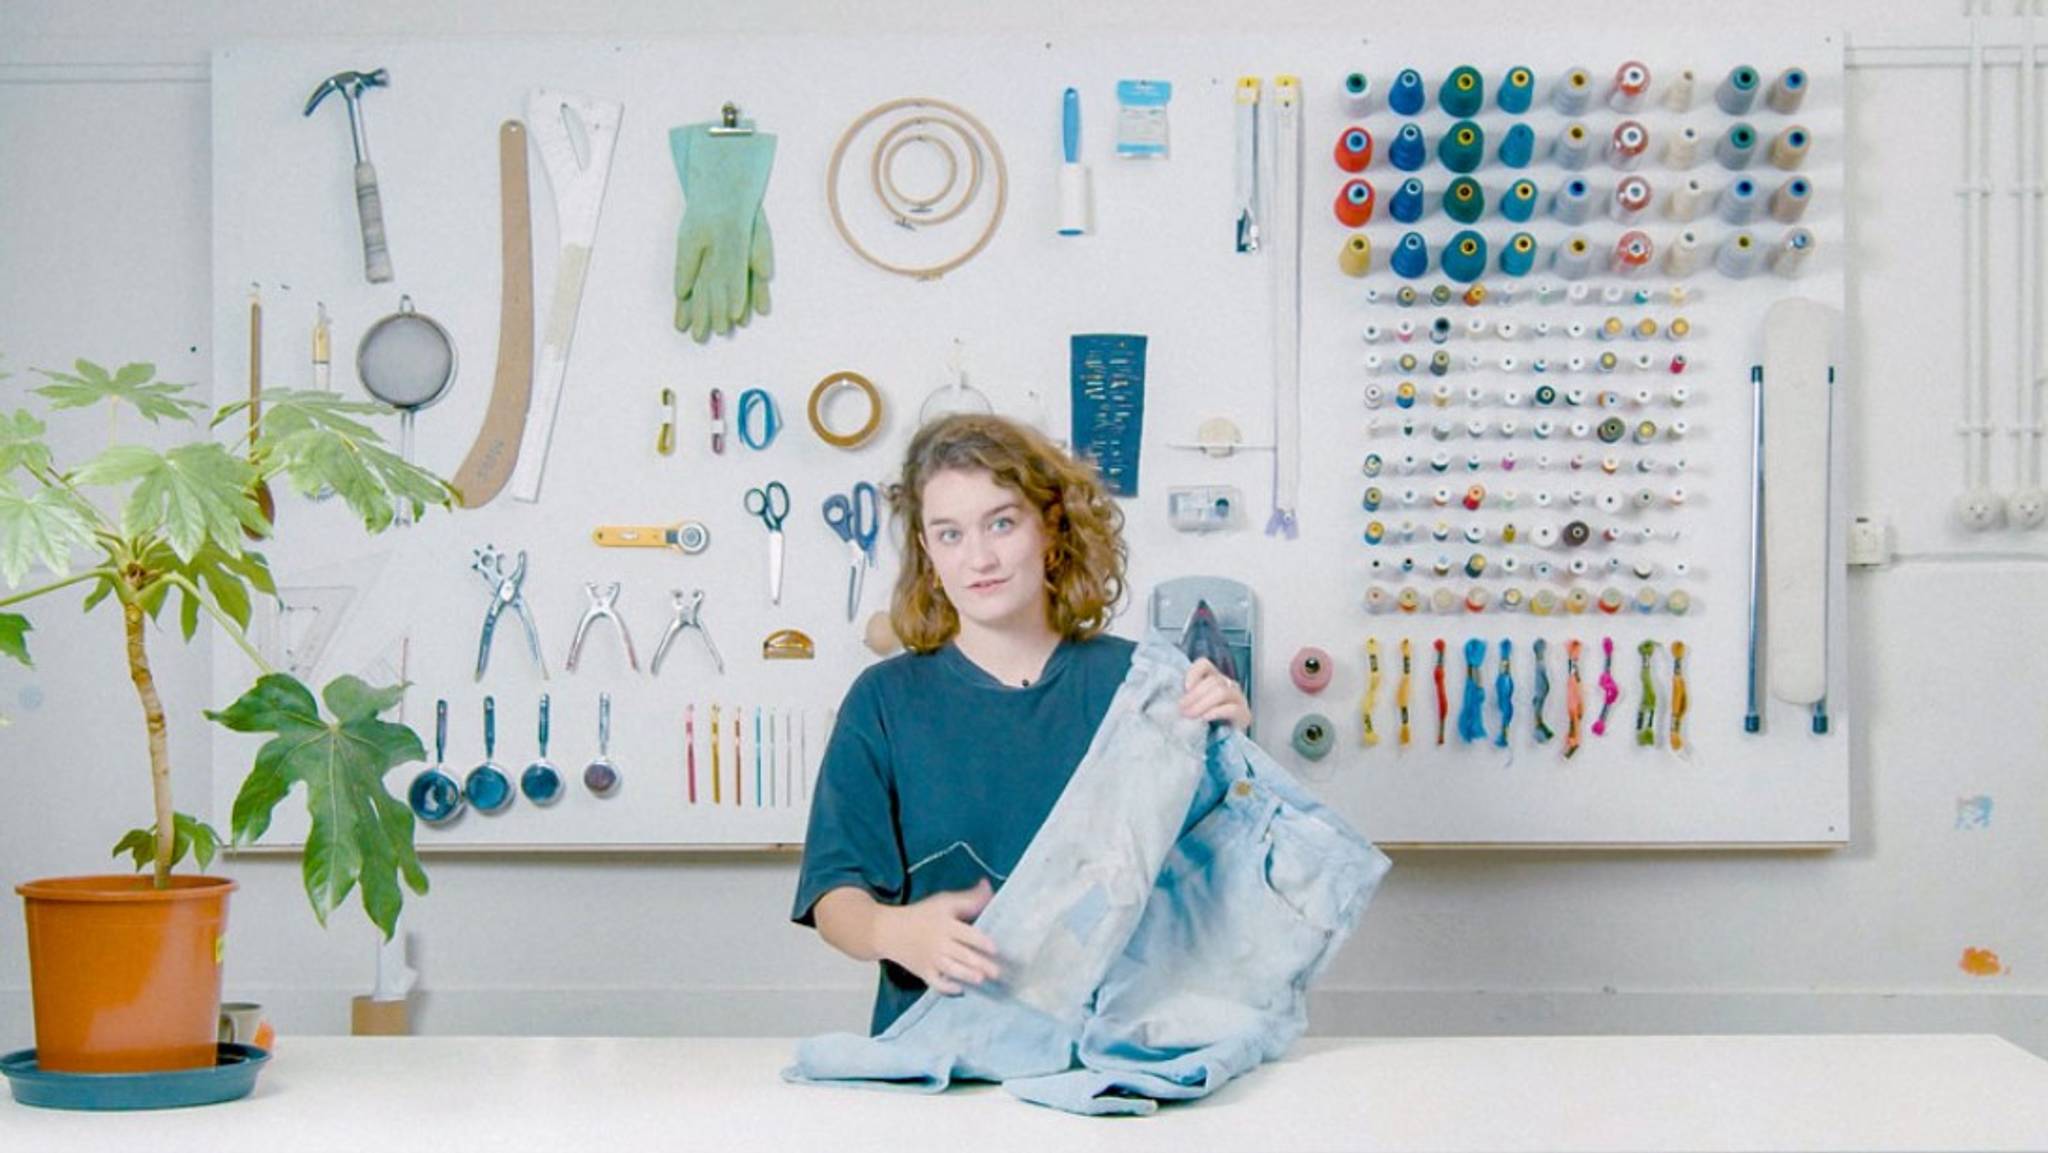 Fixing Fashion teaches people to make clothes last